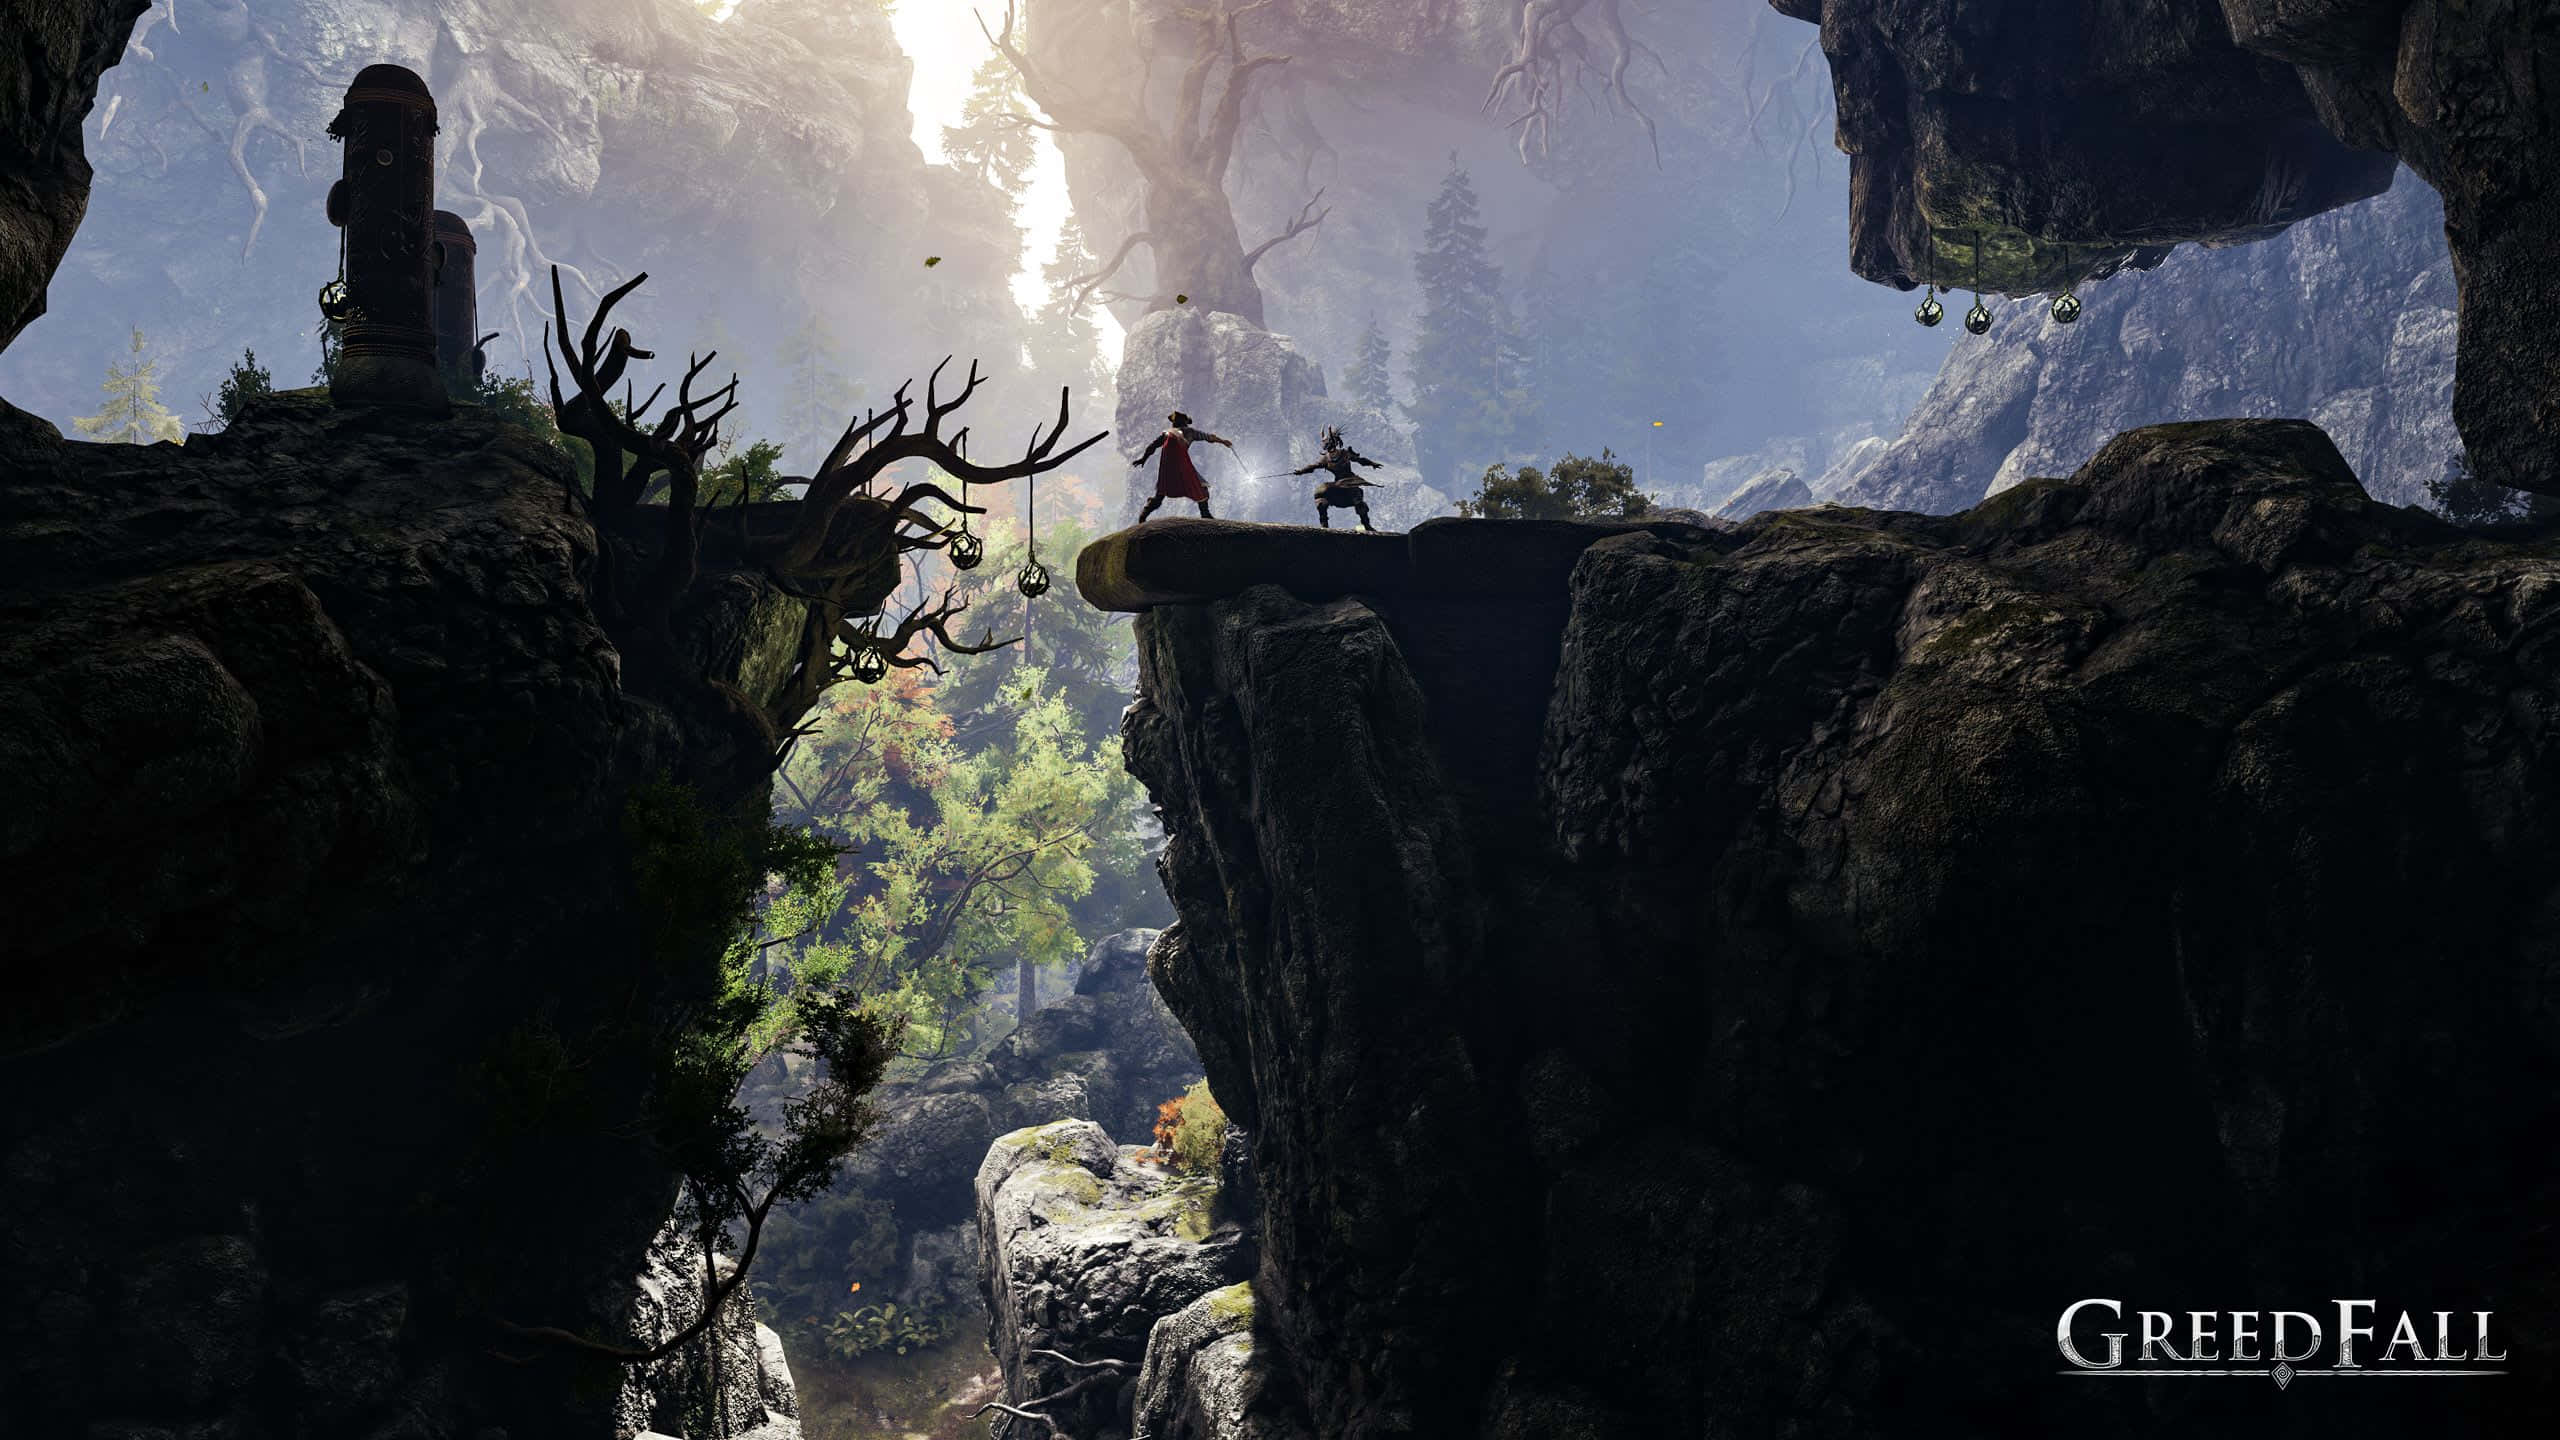 Adventurers exploring a mysterious island in Greedfall